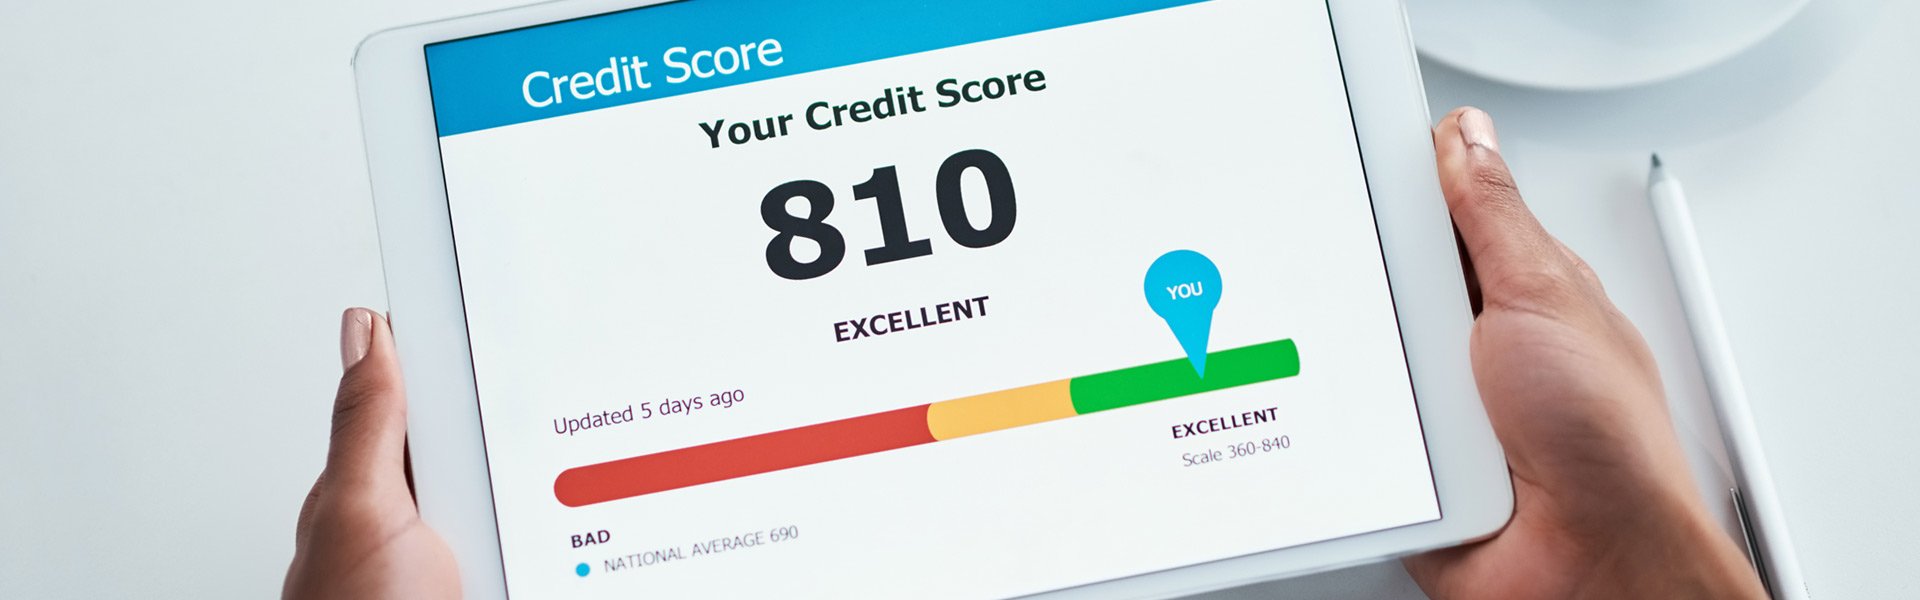 Hands holding a tablet displaying a credit score of 810